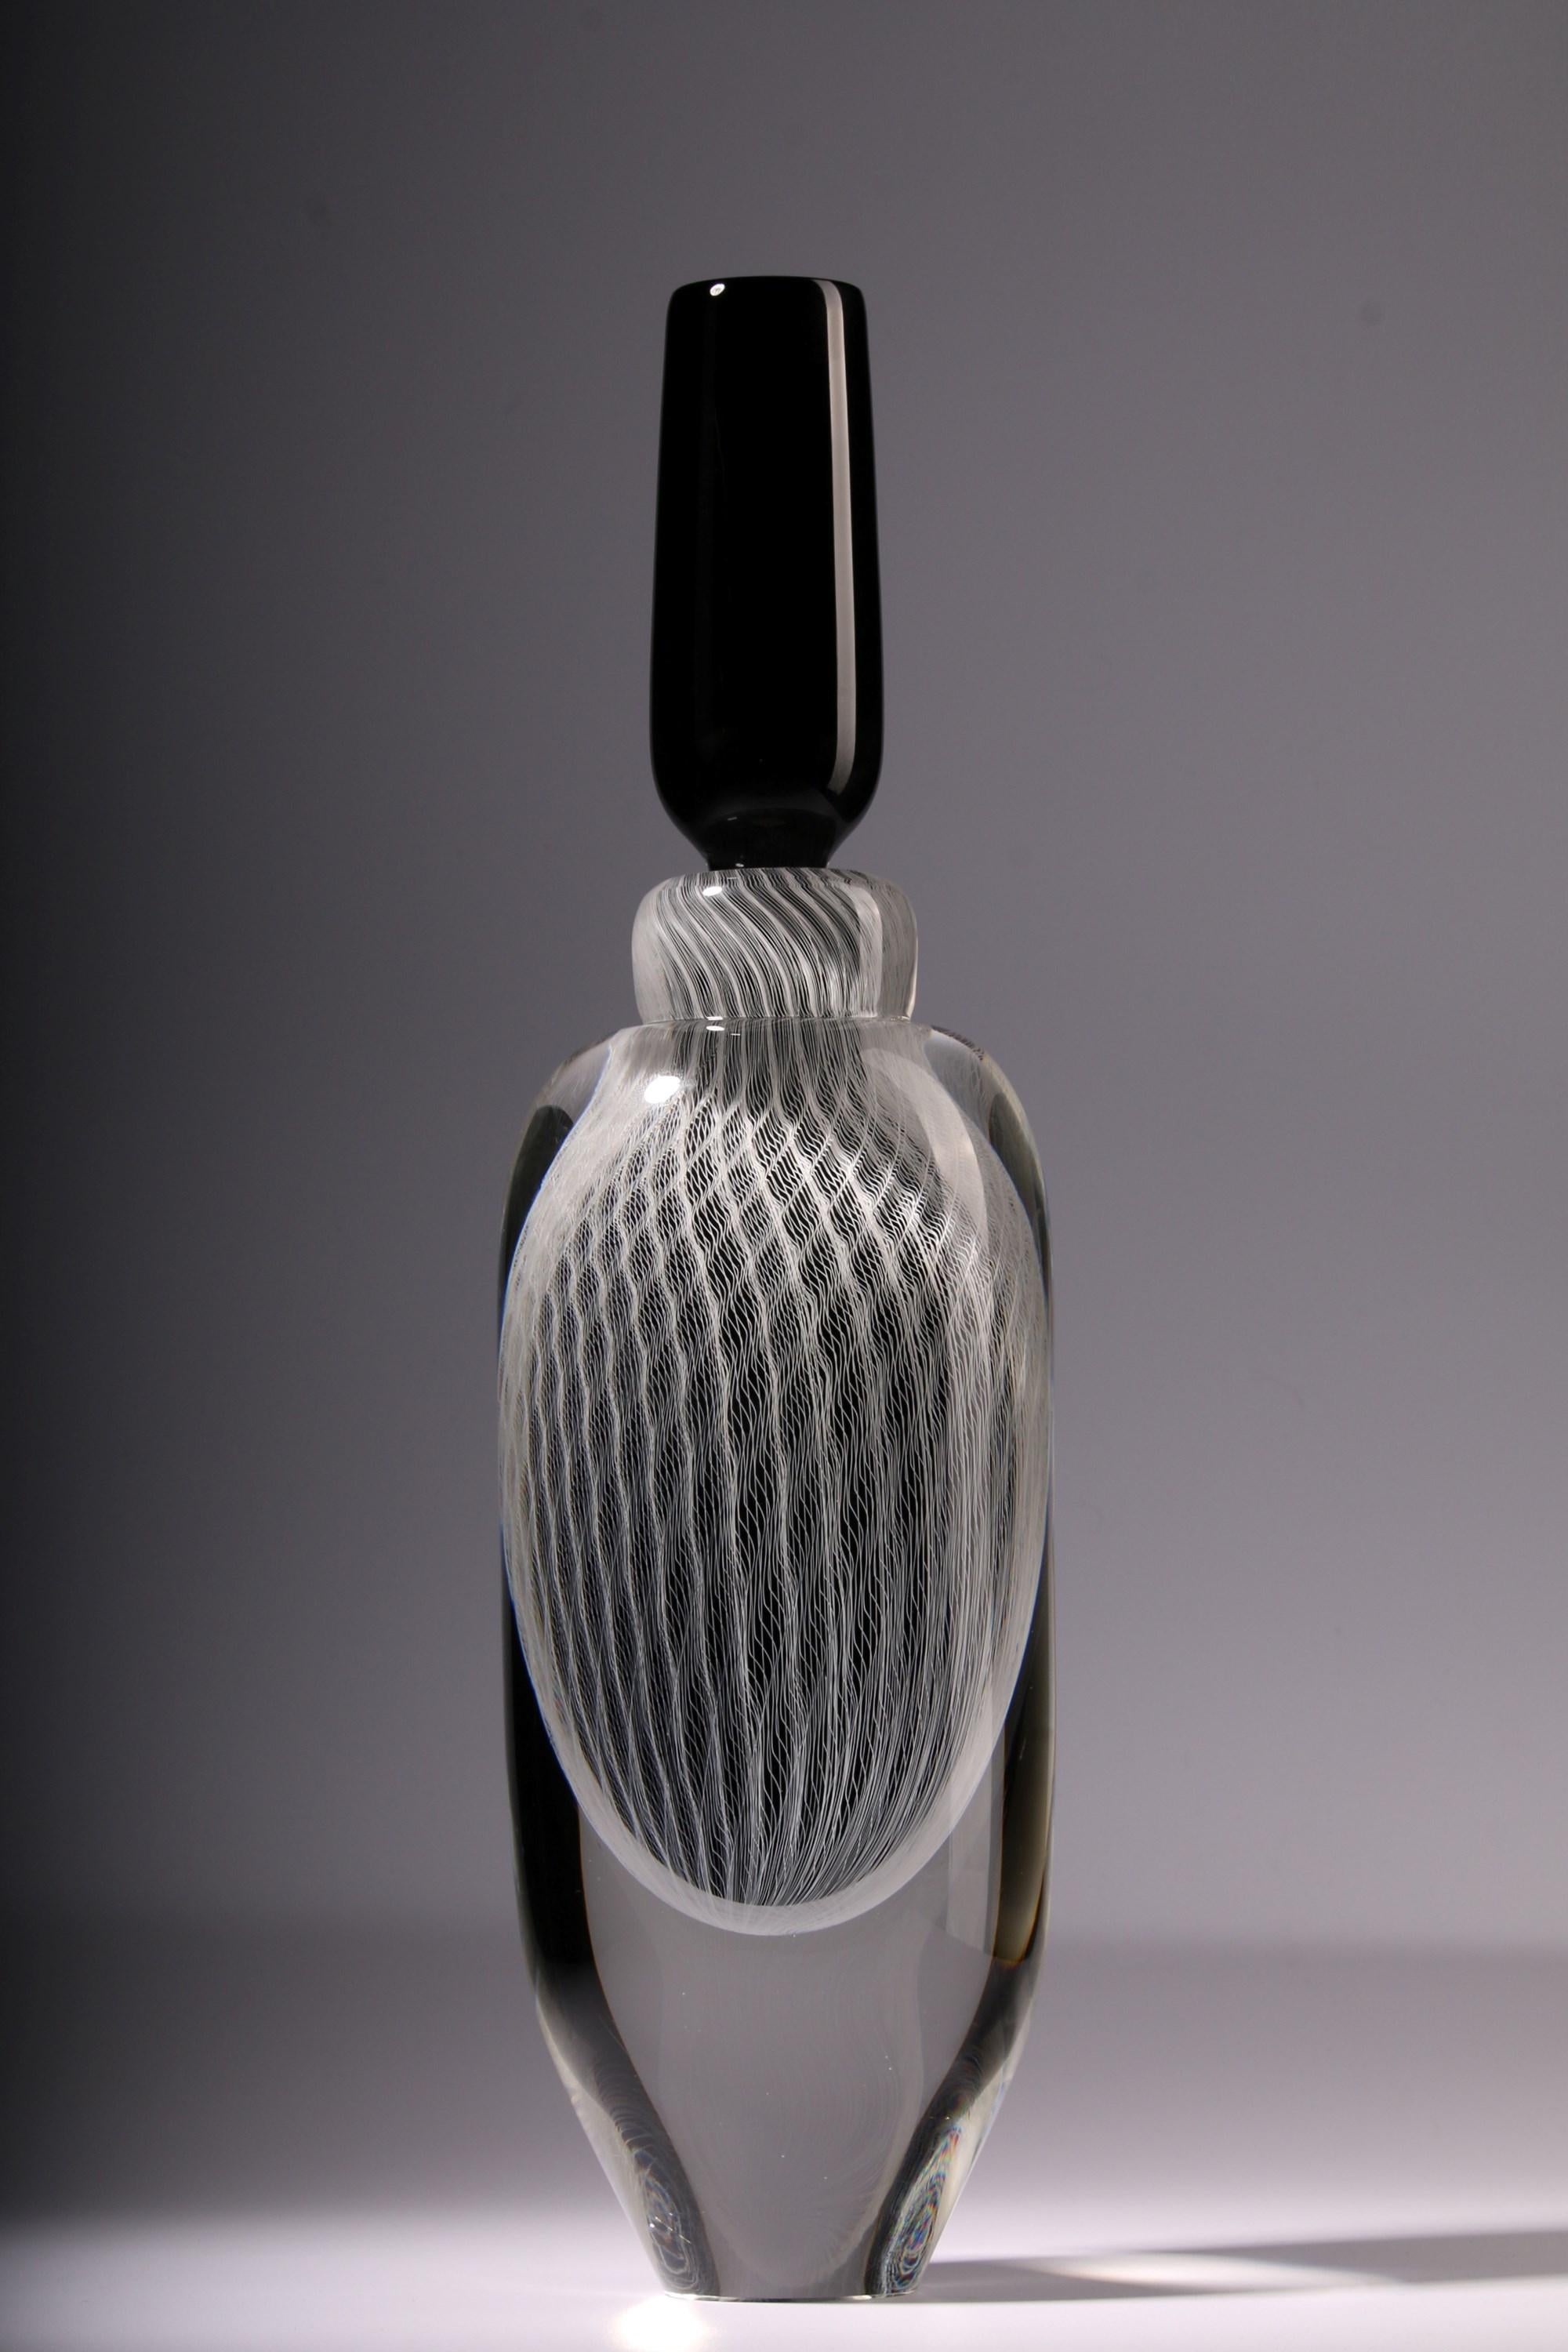 Moire, a Black, White & Clear Large Sculptural Glass Bottle by Peter Bowles For Sale 1